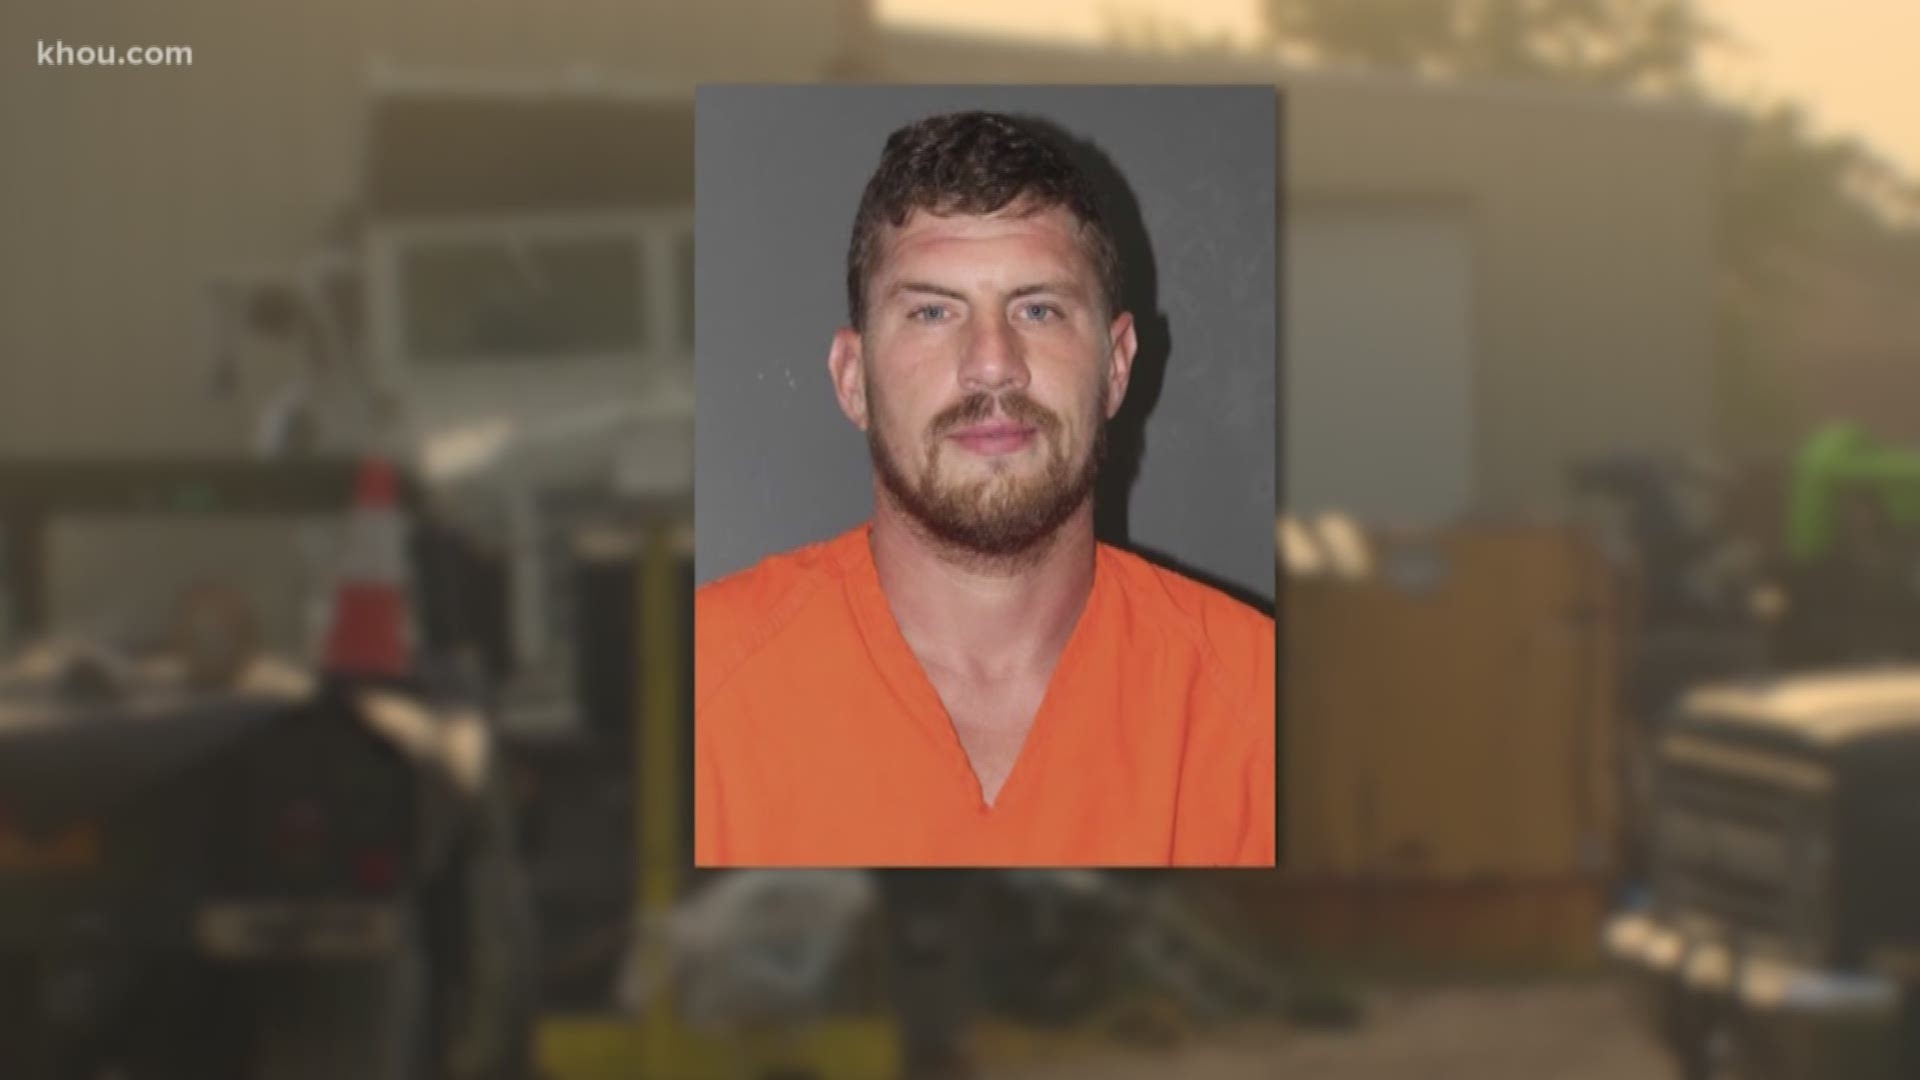 A man has been charged with capital murder after deputies said he killed three of his friends who were helping him cleanup his front yard.